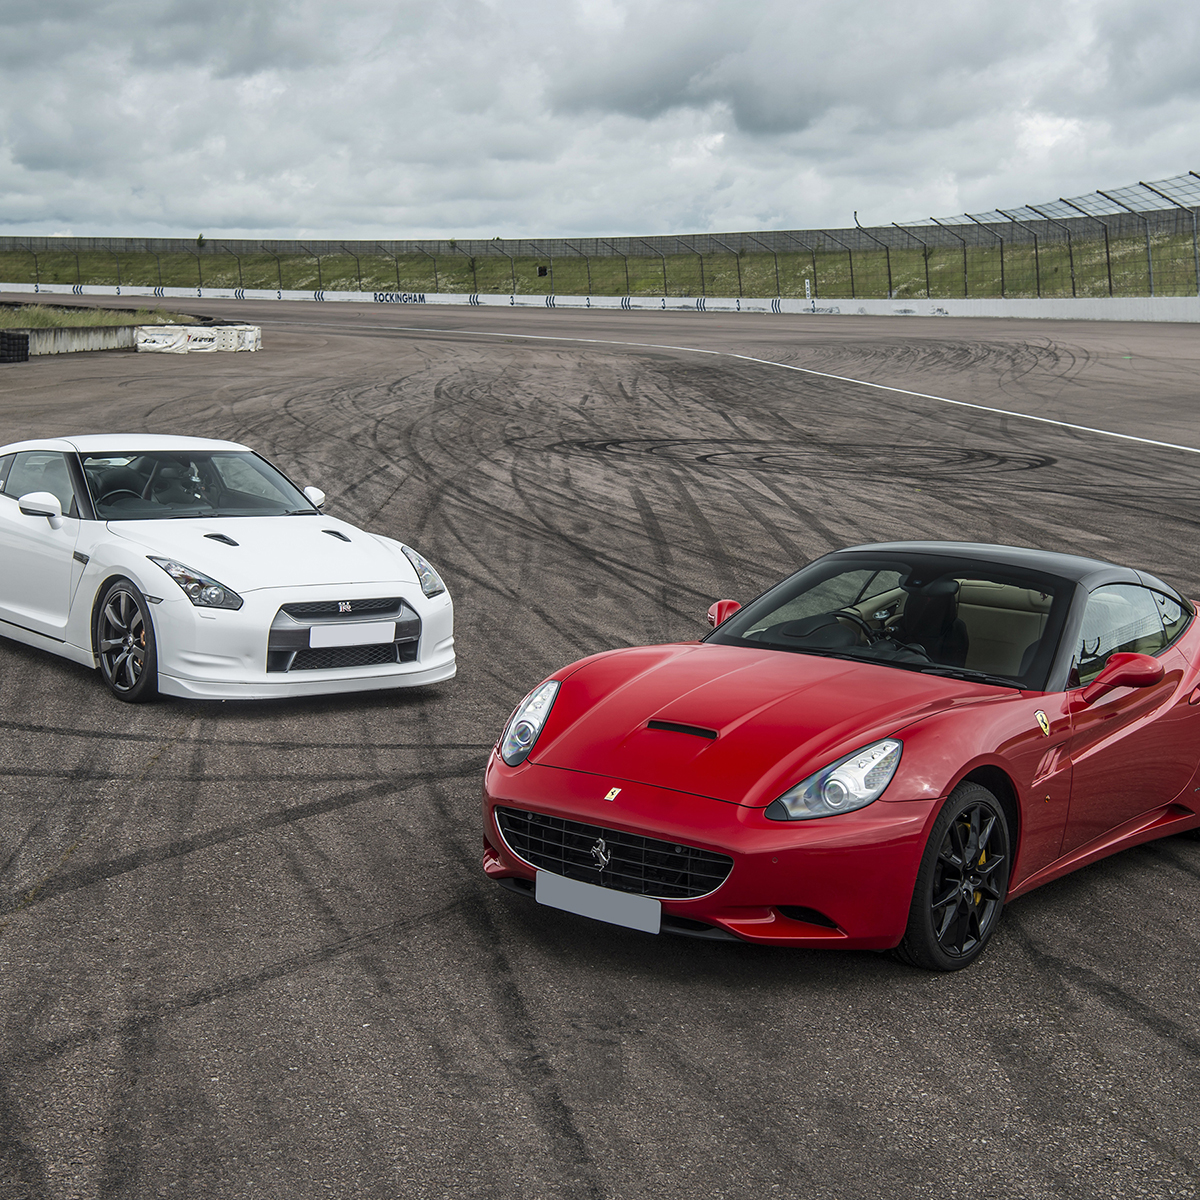 Double Supercar Driving Experience